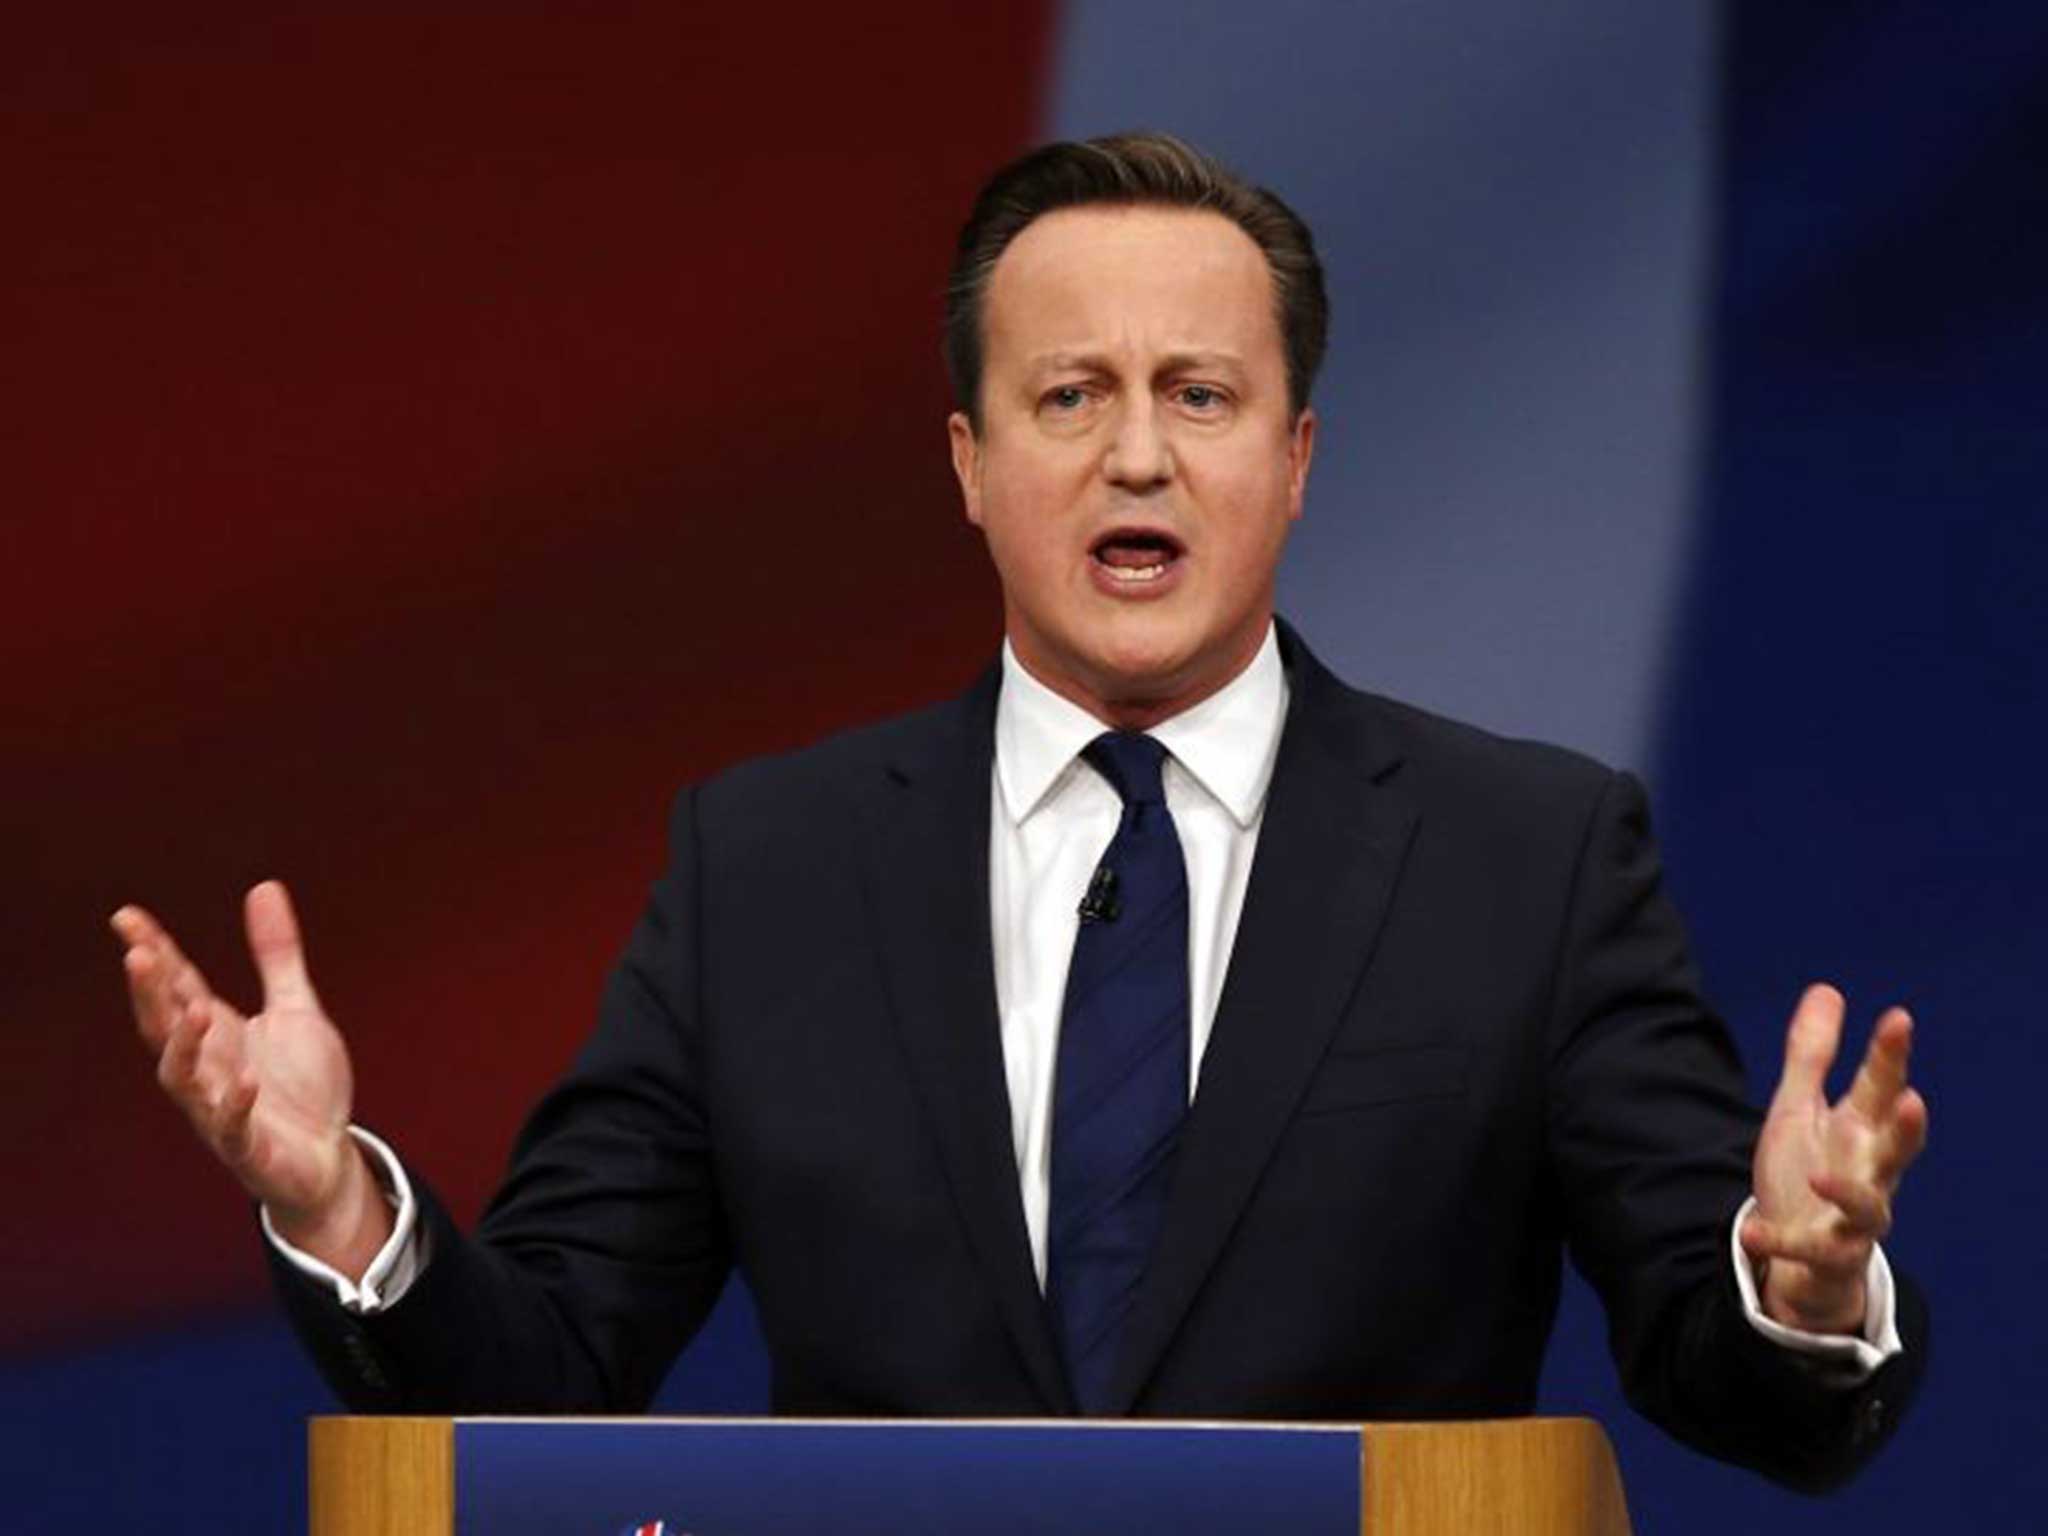 Cameron used part of his speech to launch a blistering attack on the Labour leader